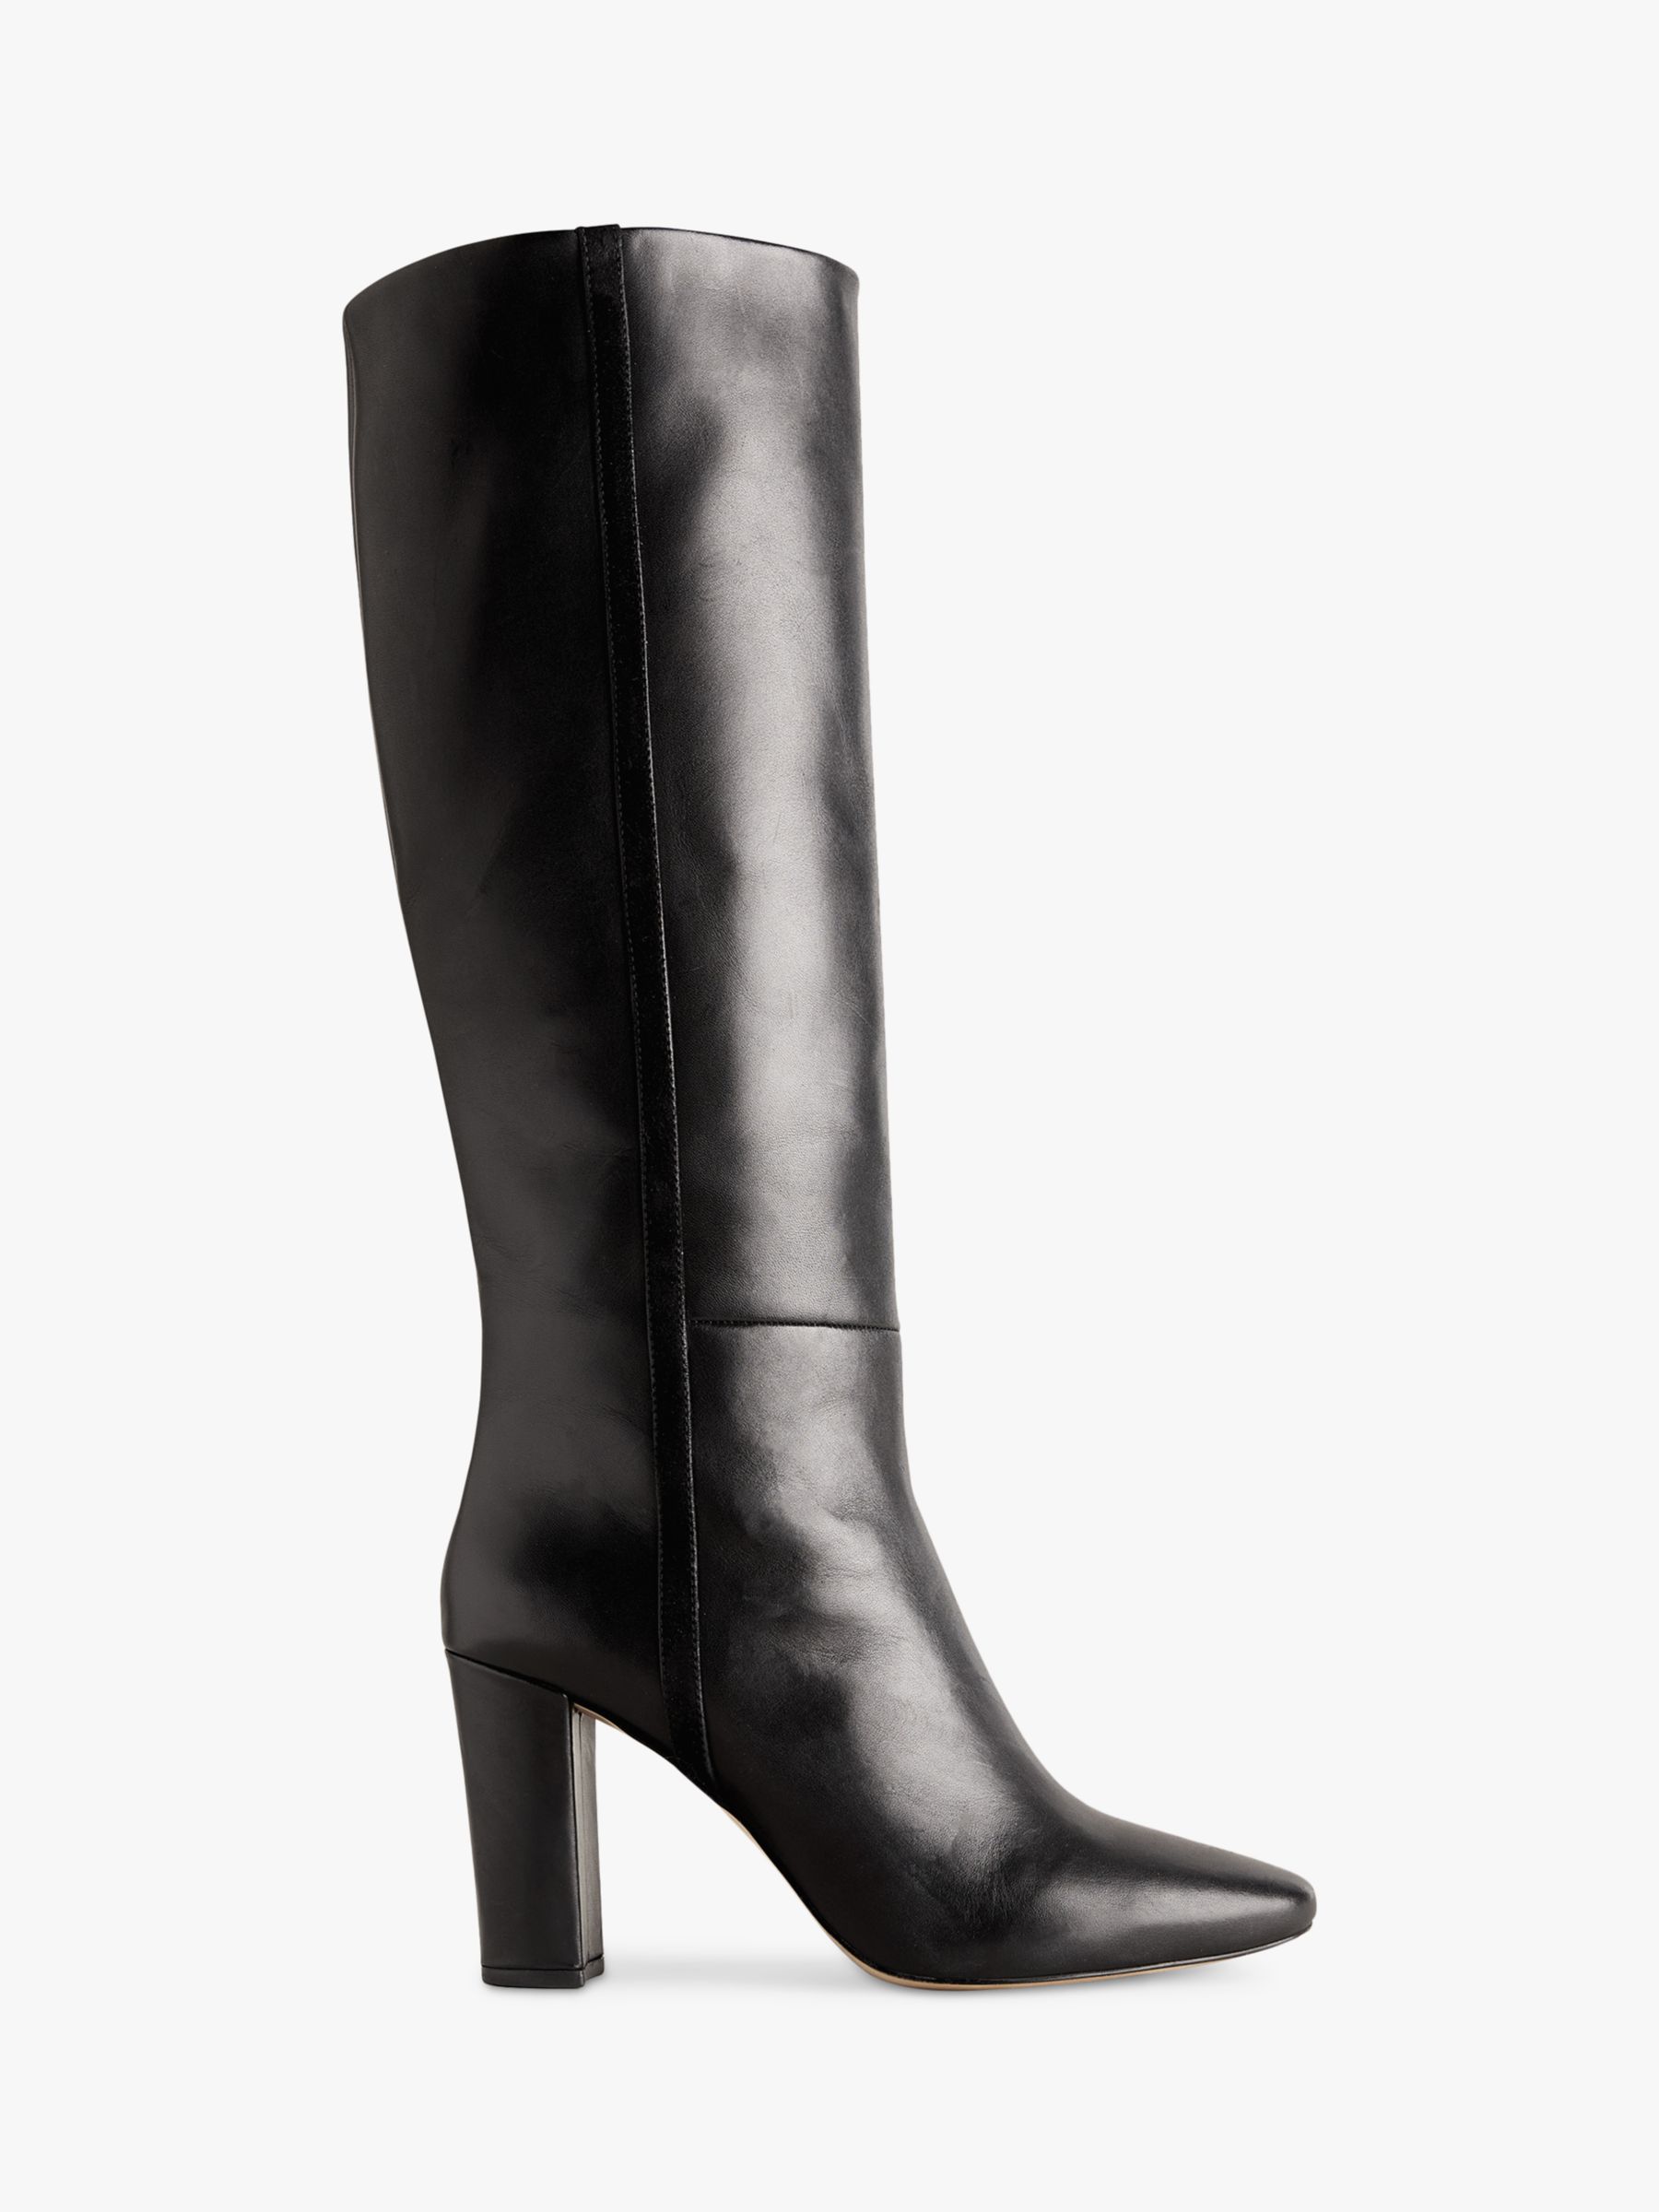 Boden Leather Knee High Boots, Black